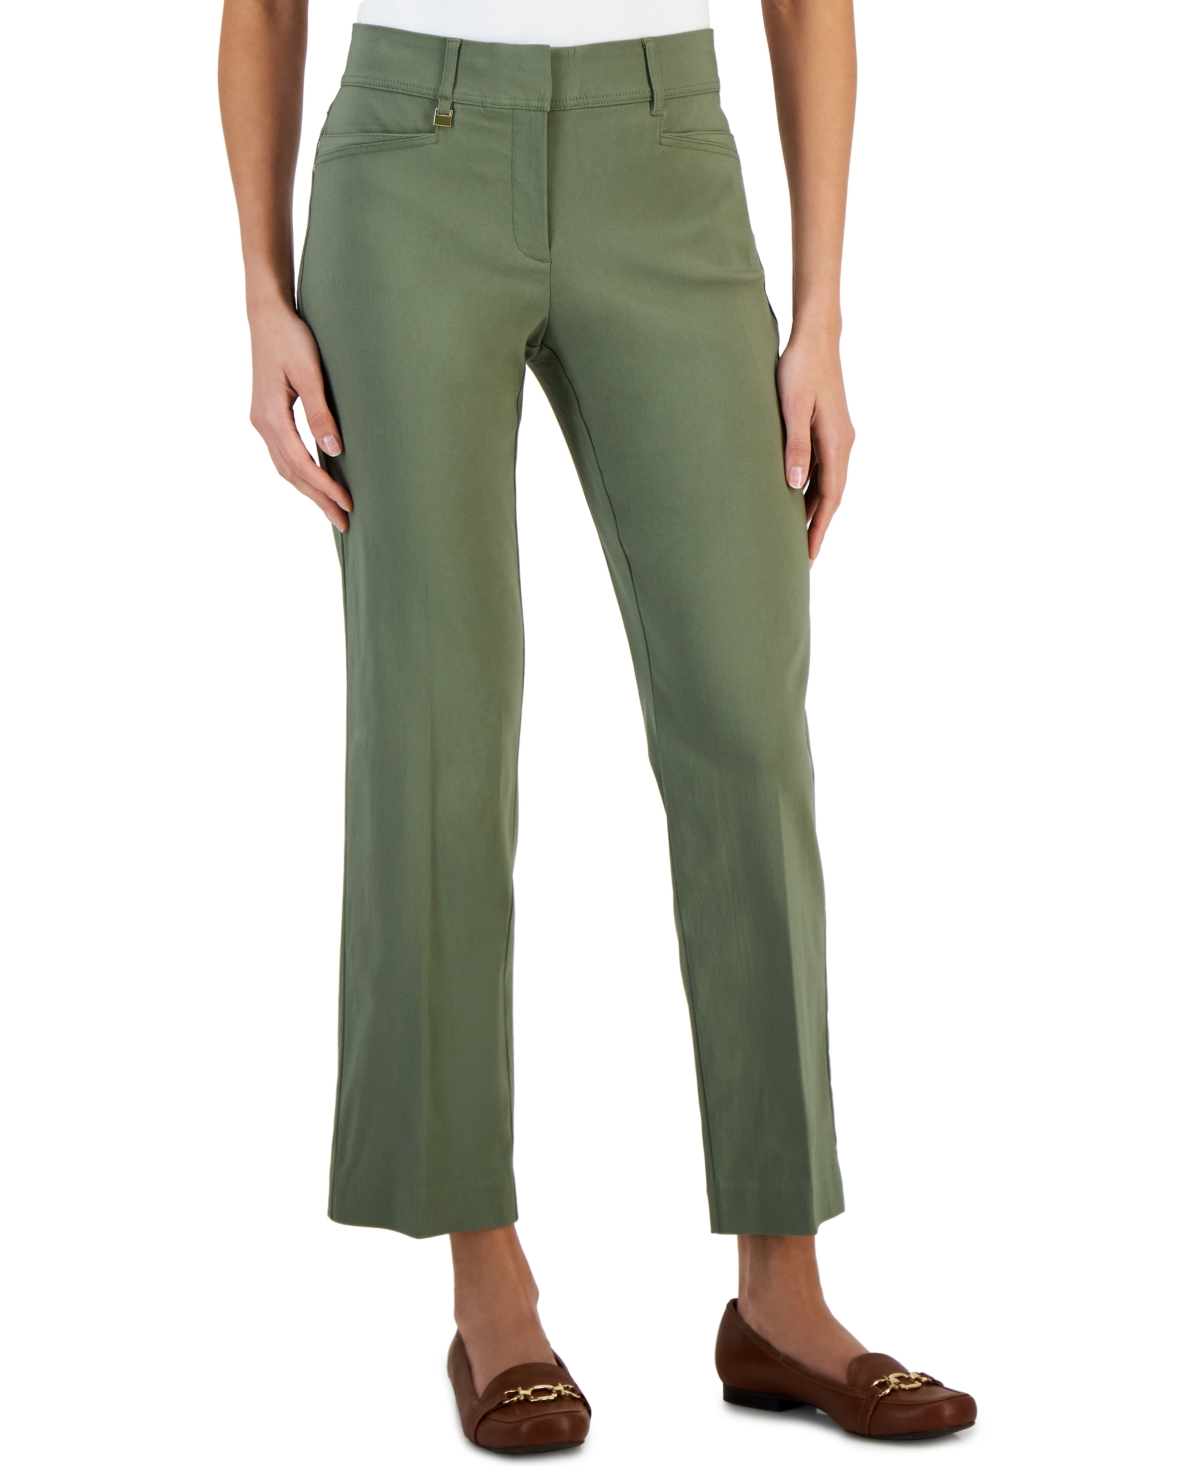 Jm Collection Regular and Short Length Curvy-Fit Straight-Leg Pants,  Created for Macy's